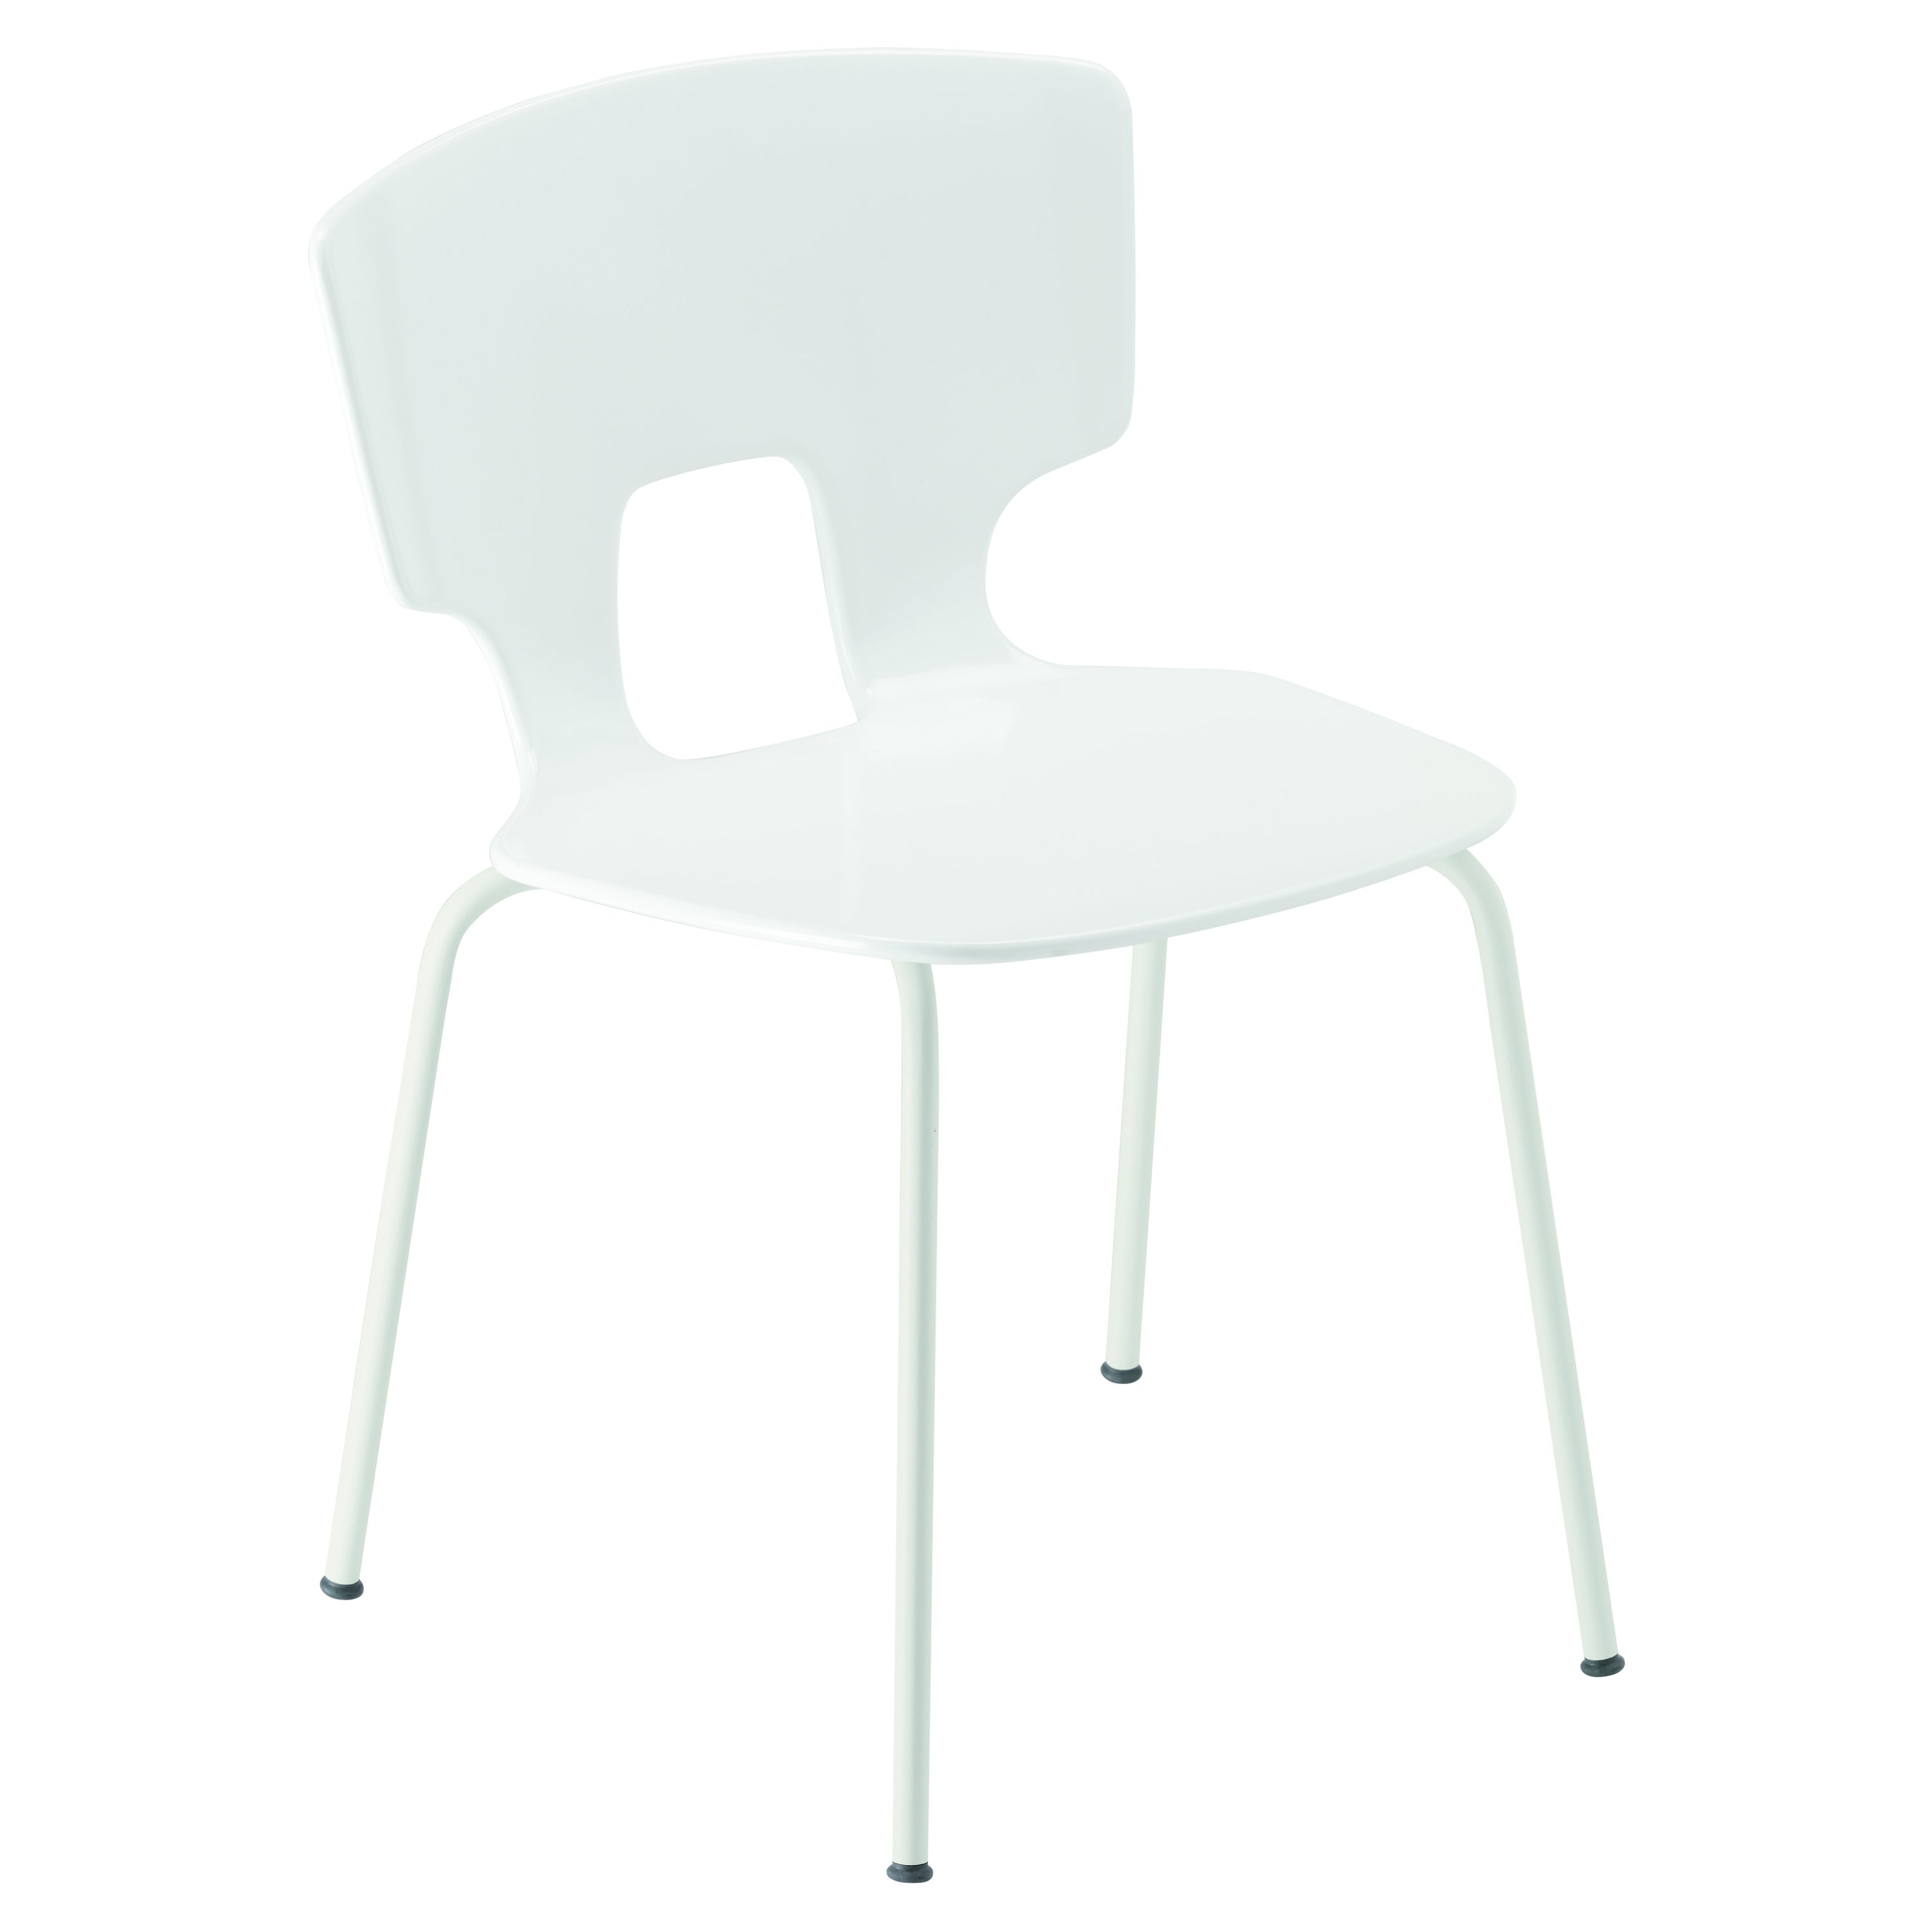 Alias 50A Erice Chair in White Lacquered Steel Frame by Alfredo Häberli